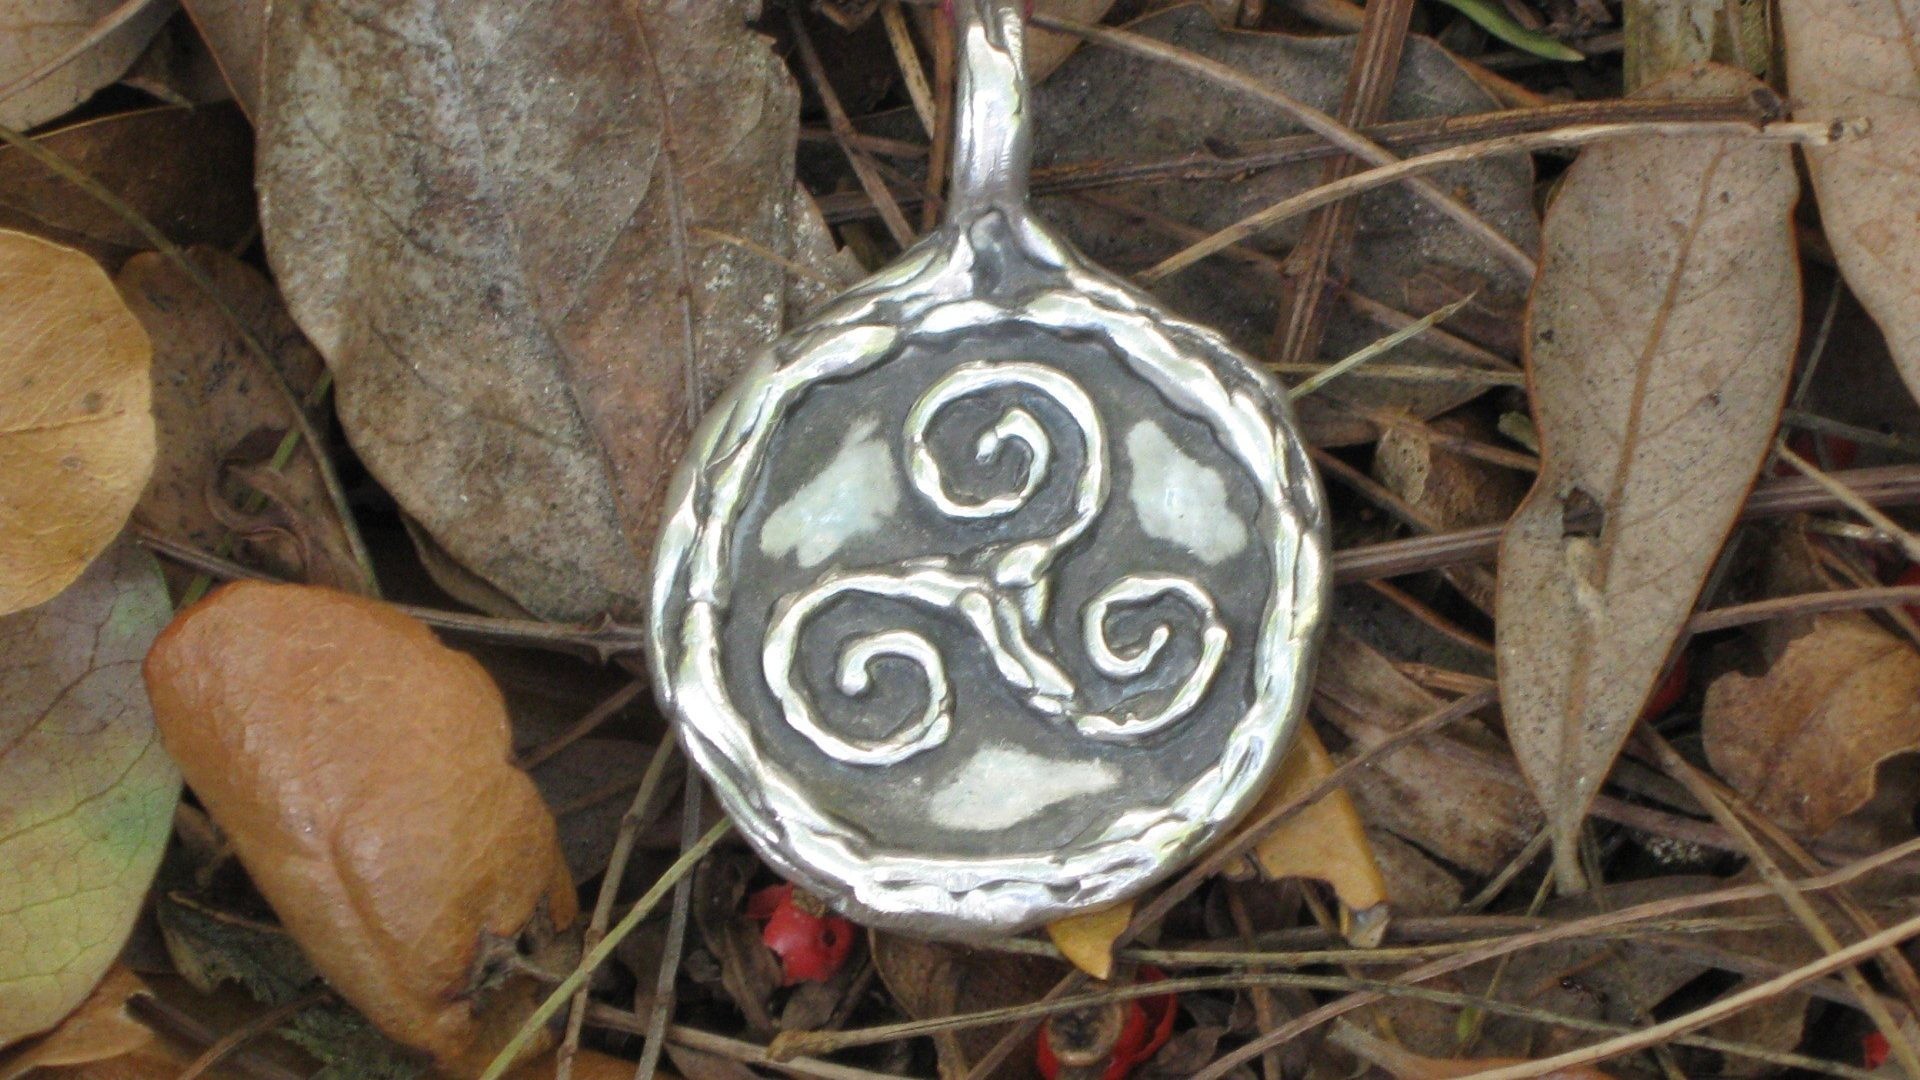 1920x1080 Misc Celts Spiral Myth Barbarian Nature Forest Mountain Necklace Triskel  Paganism Pagan Viking North Triskell Celtic Gallic Nordic Cross Hd  Wallpapers